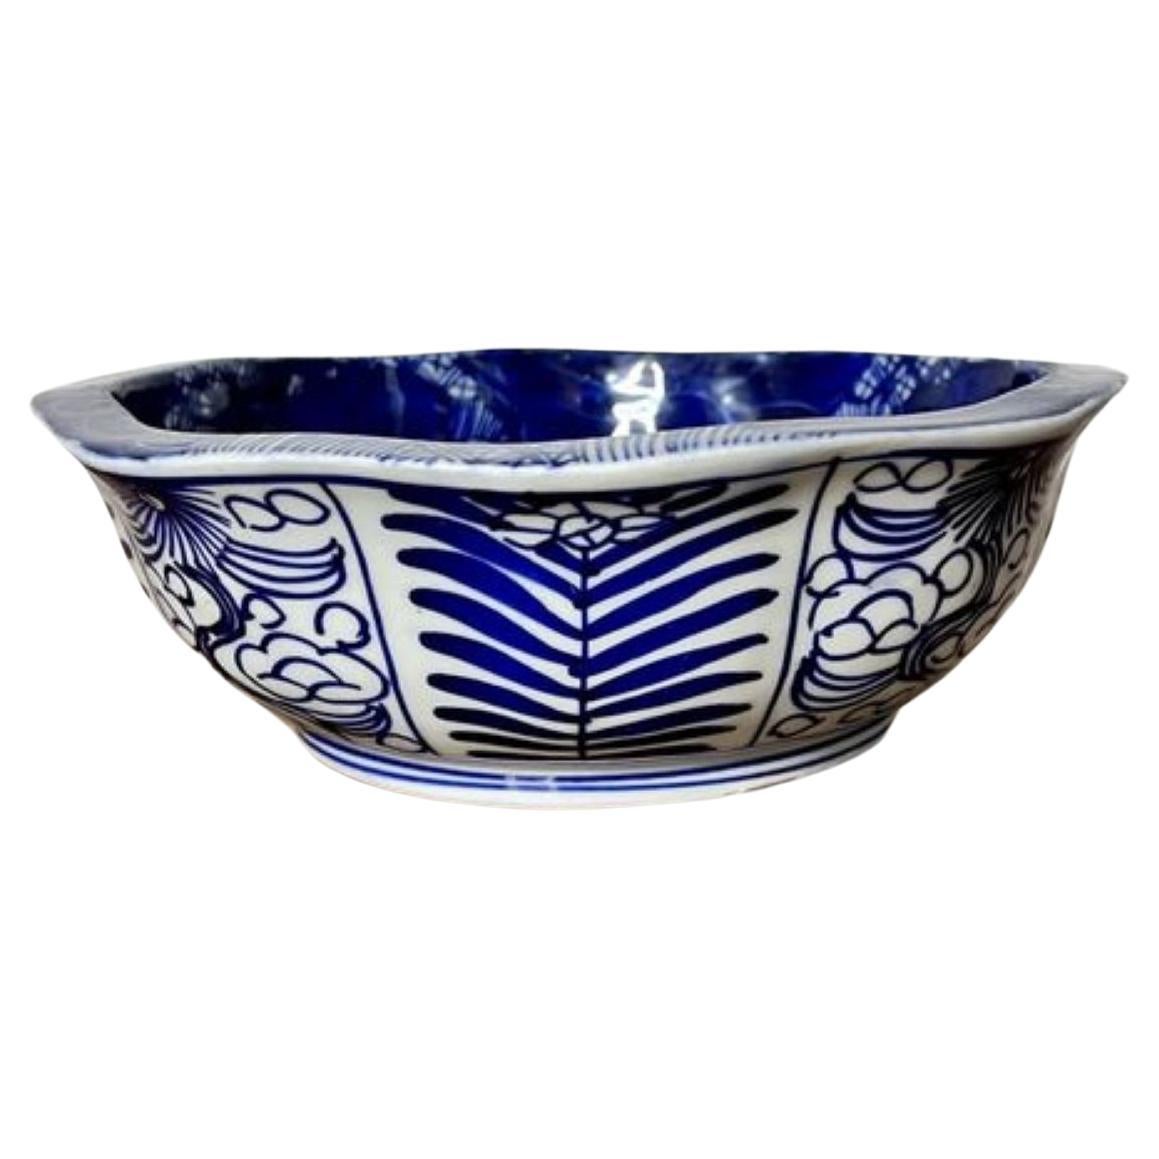 Quality antique Japanese 19th Century blue and white porcelain bowl  For Sale